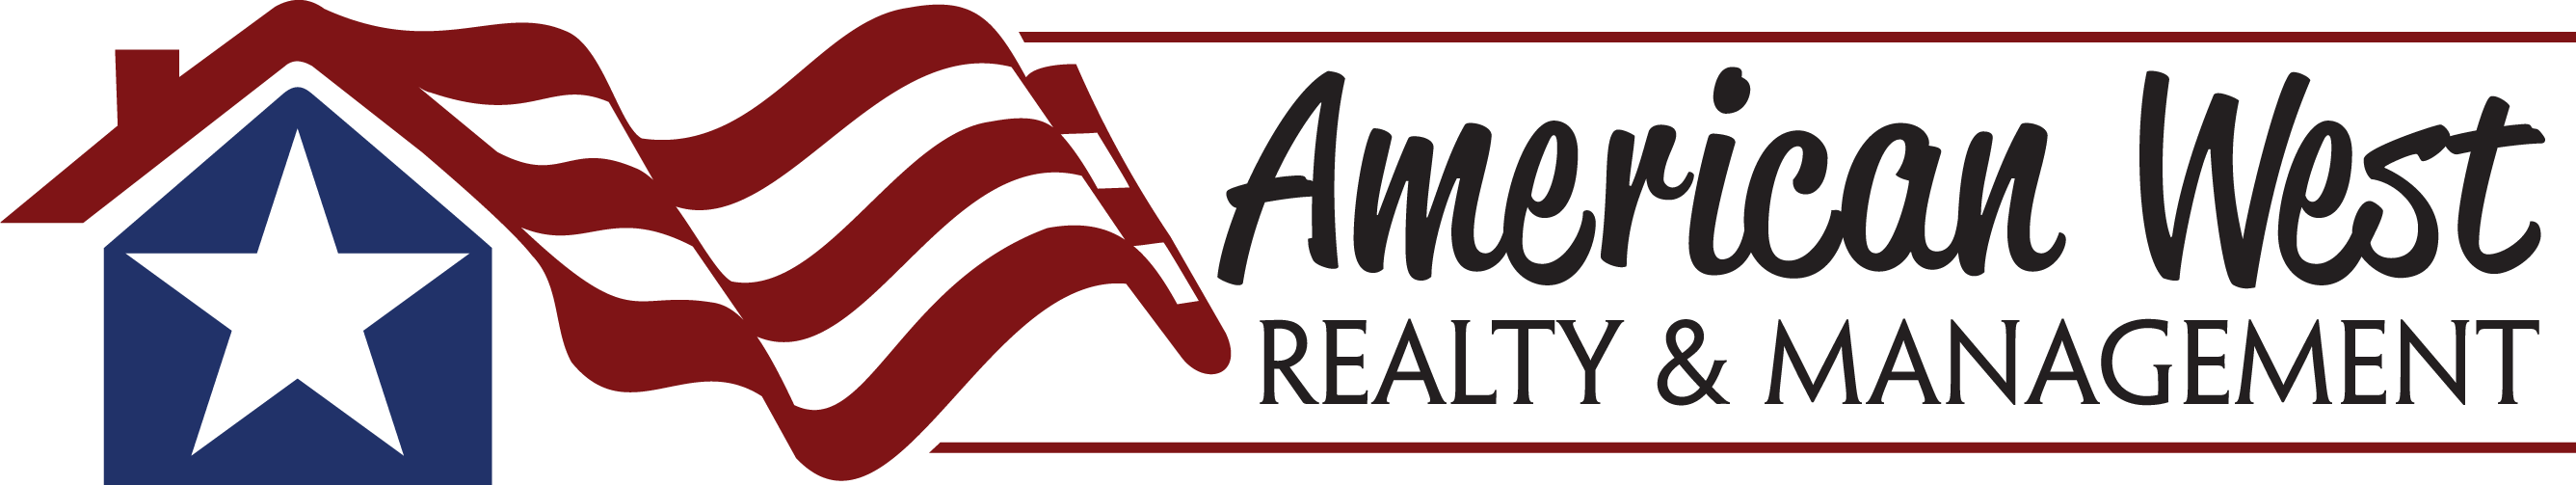 American West Realty and Management Logo